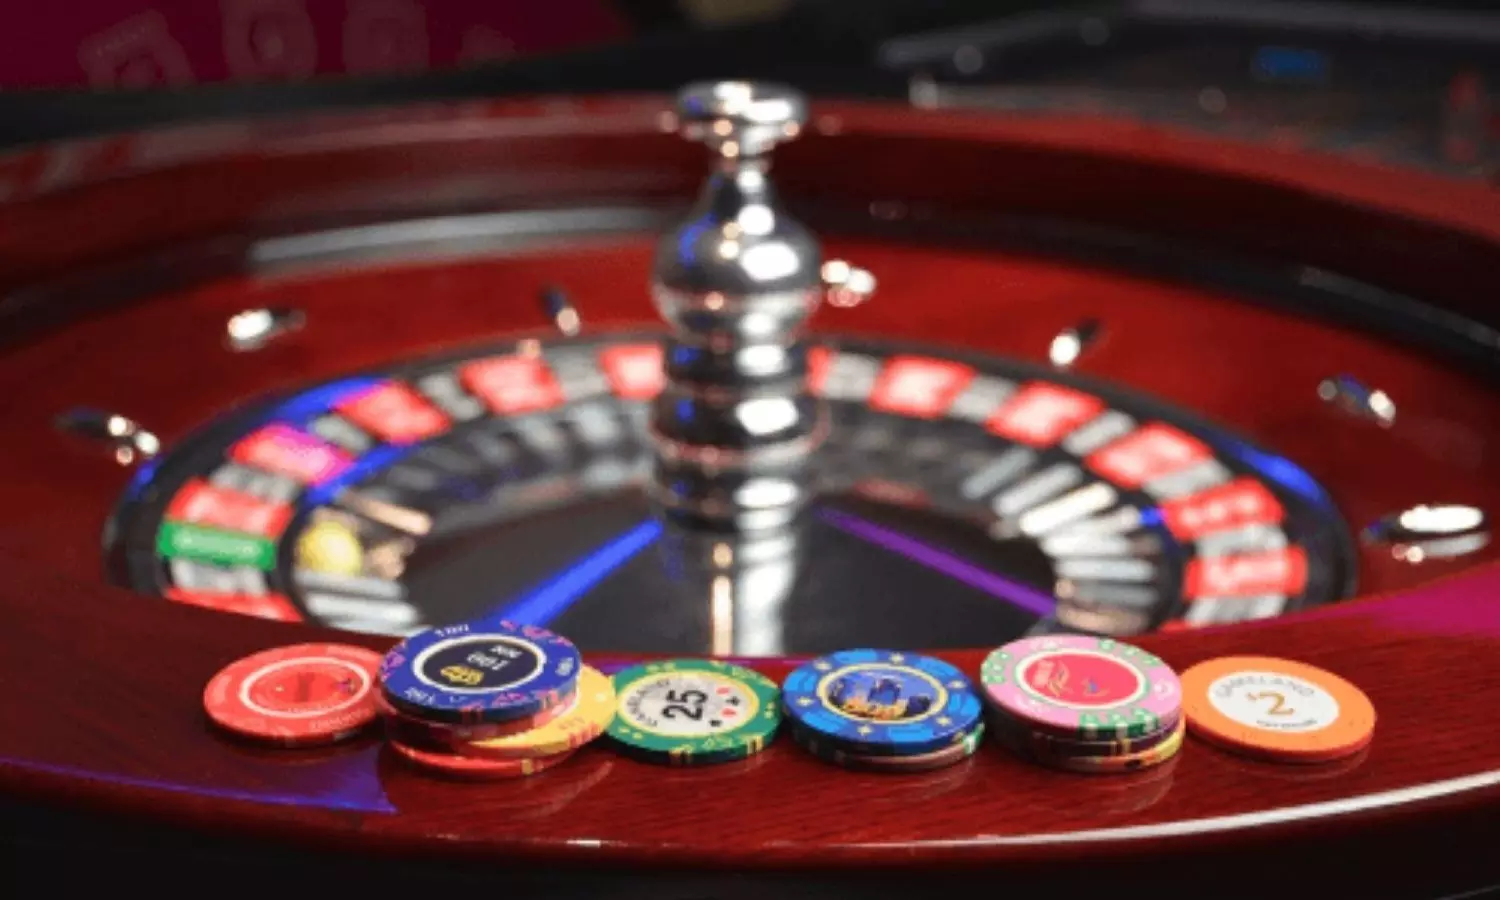 If casino online Is So Terrible, Why Don't Statistics Show It?